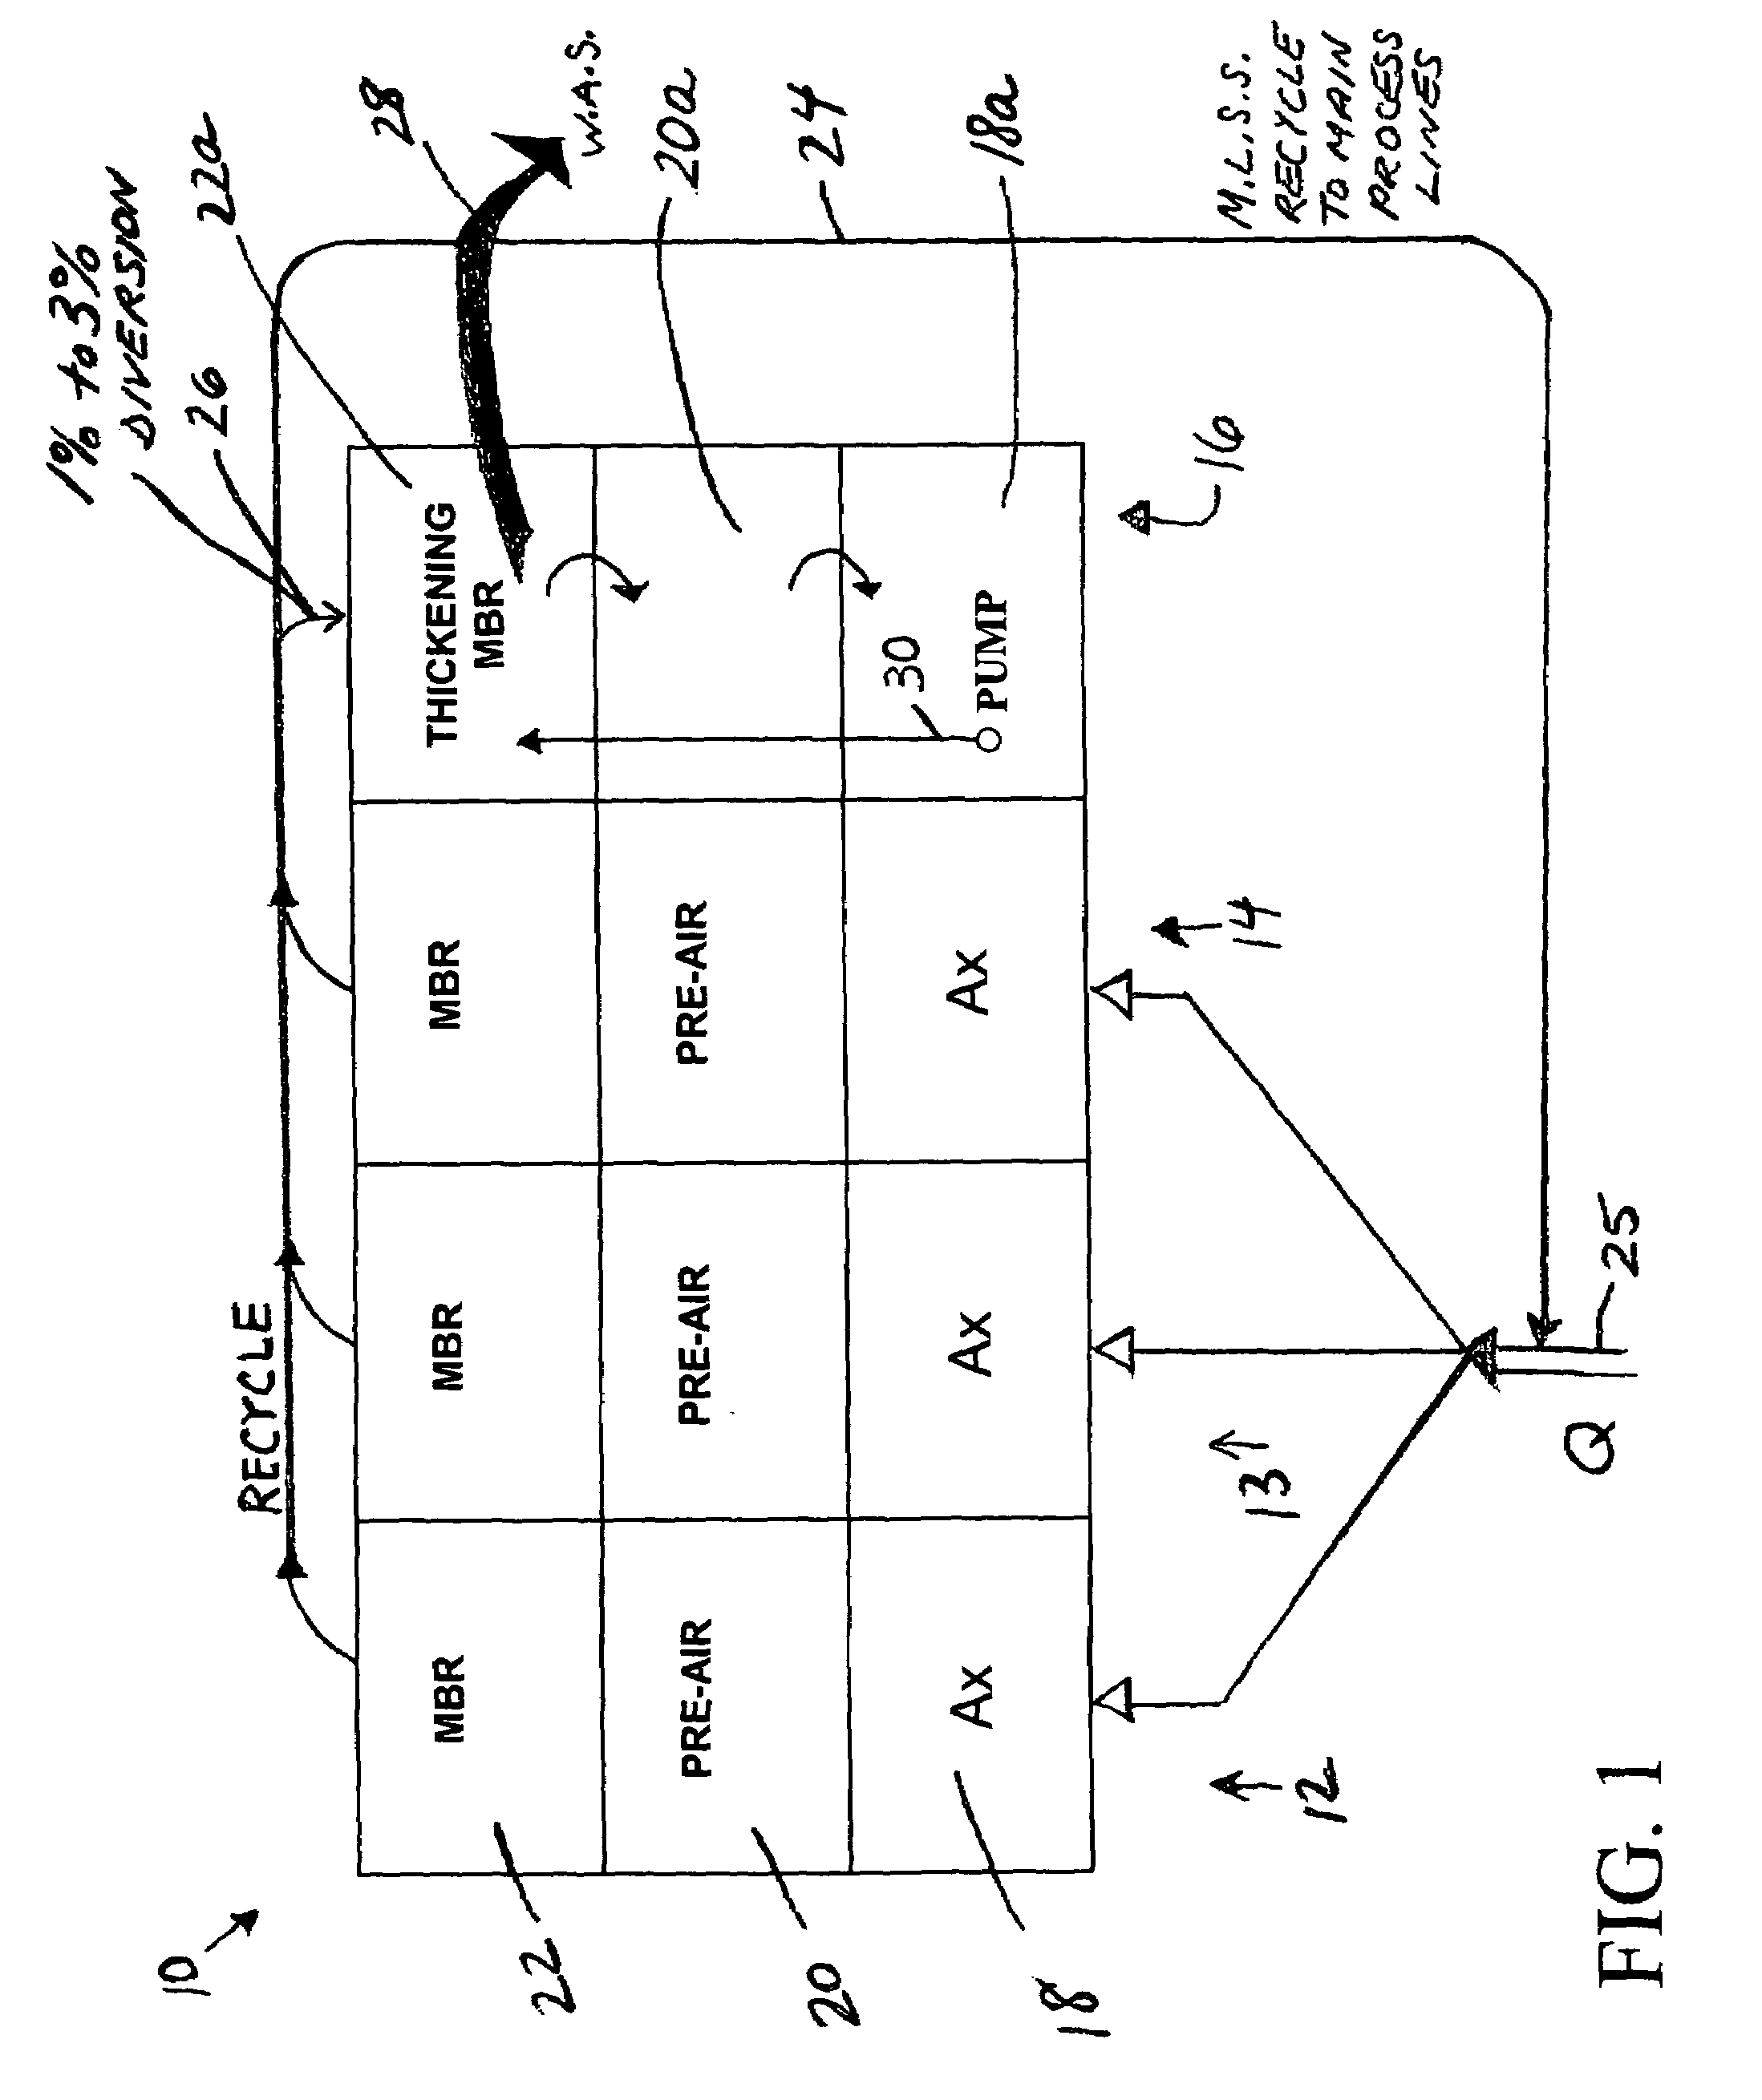 Wastewater treatment system with membrane separators and provision for storm flow conditions